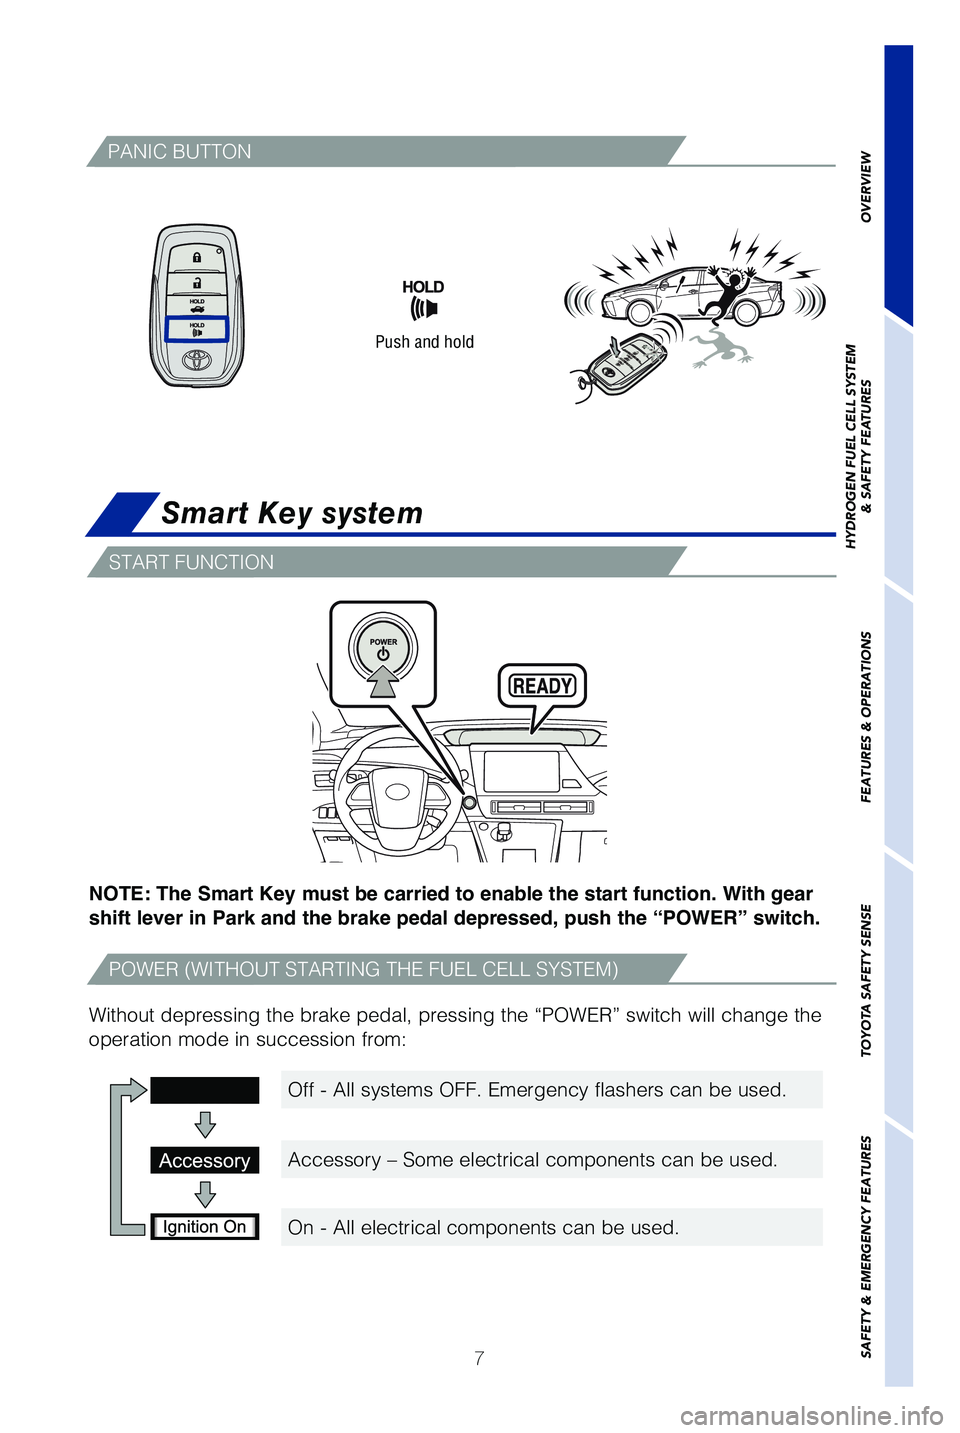 TOYOTA MIRAI 2019  Owners Manual (in English) 7
Smart Key system
Push and hold
Without depressing the brake pedal, pressing the “POWER” switch wi\
ll change the 
operation mode in succession from:
PANIC BUTTON
OVERVIEW
HYDROGEN FUEL CELL SYST